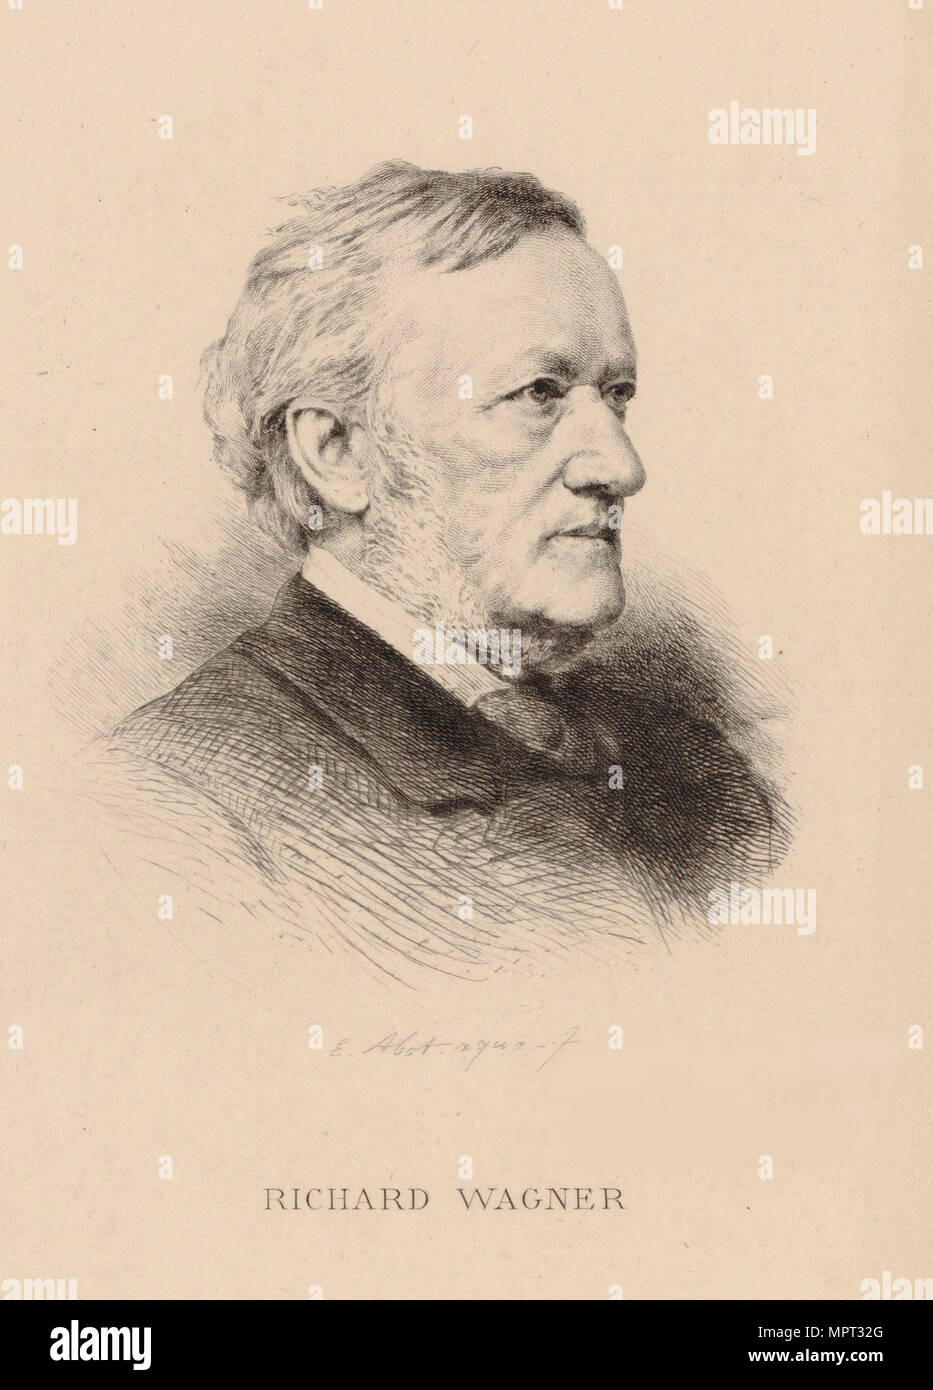 Portrait of the composer Richard Wagner (1813-1883). Stock Photo